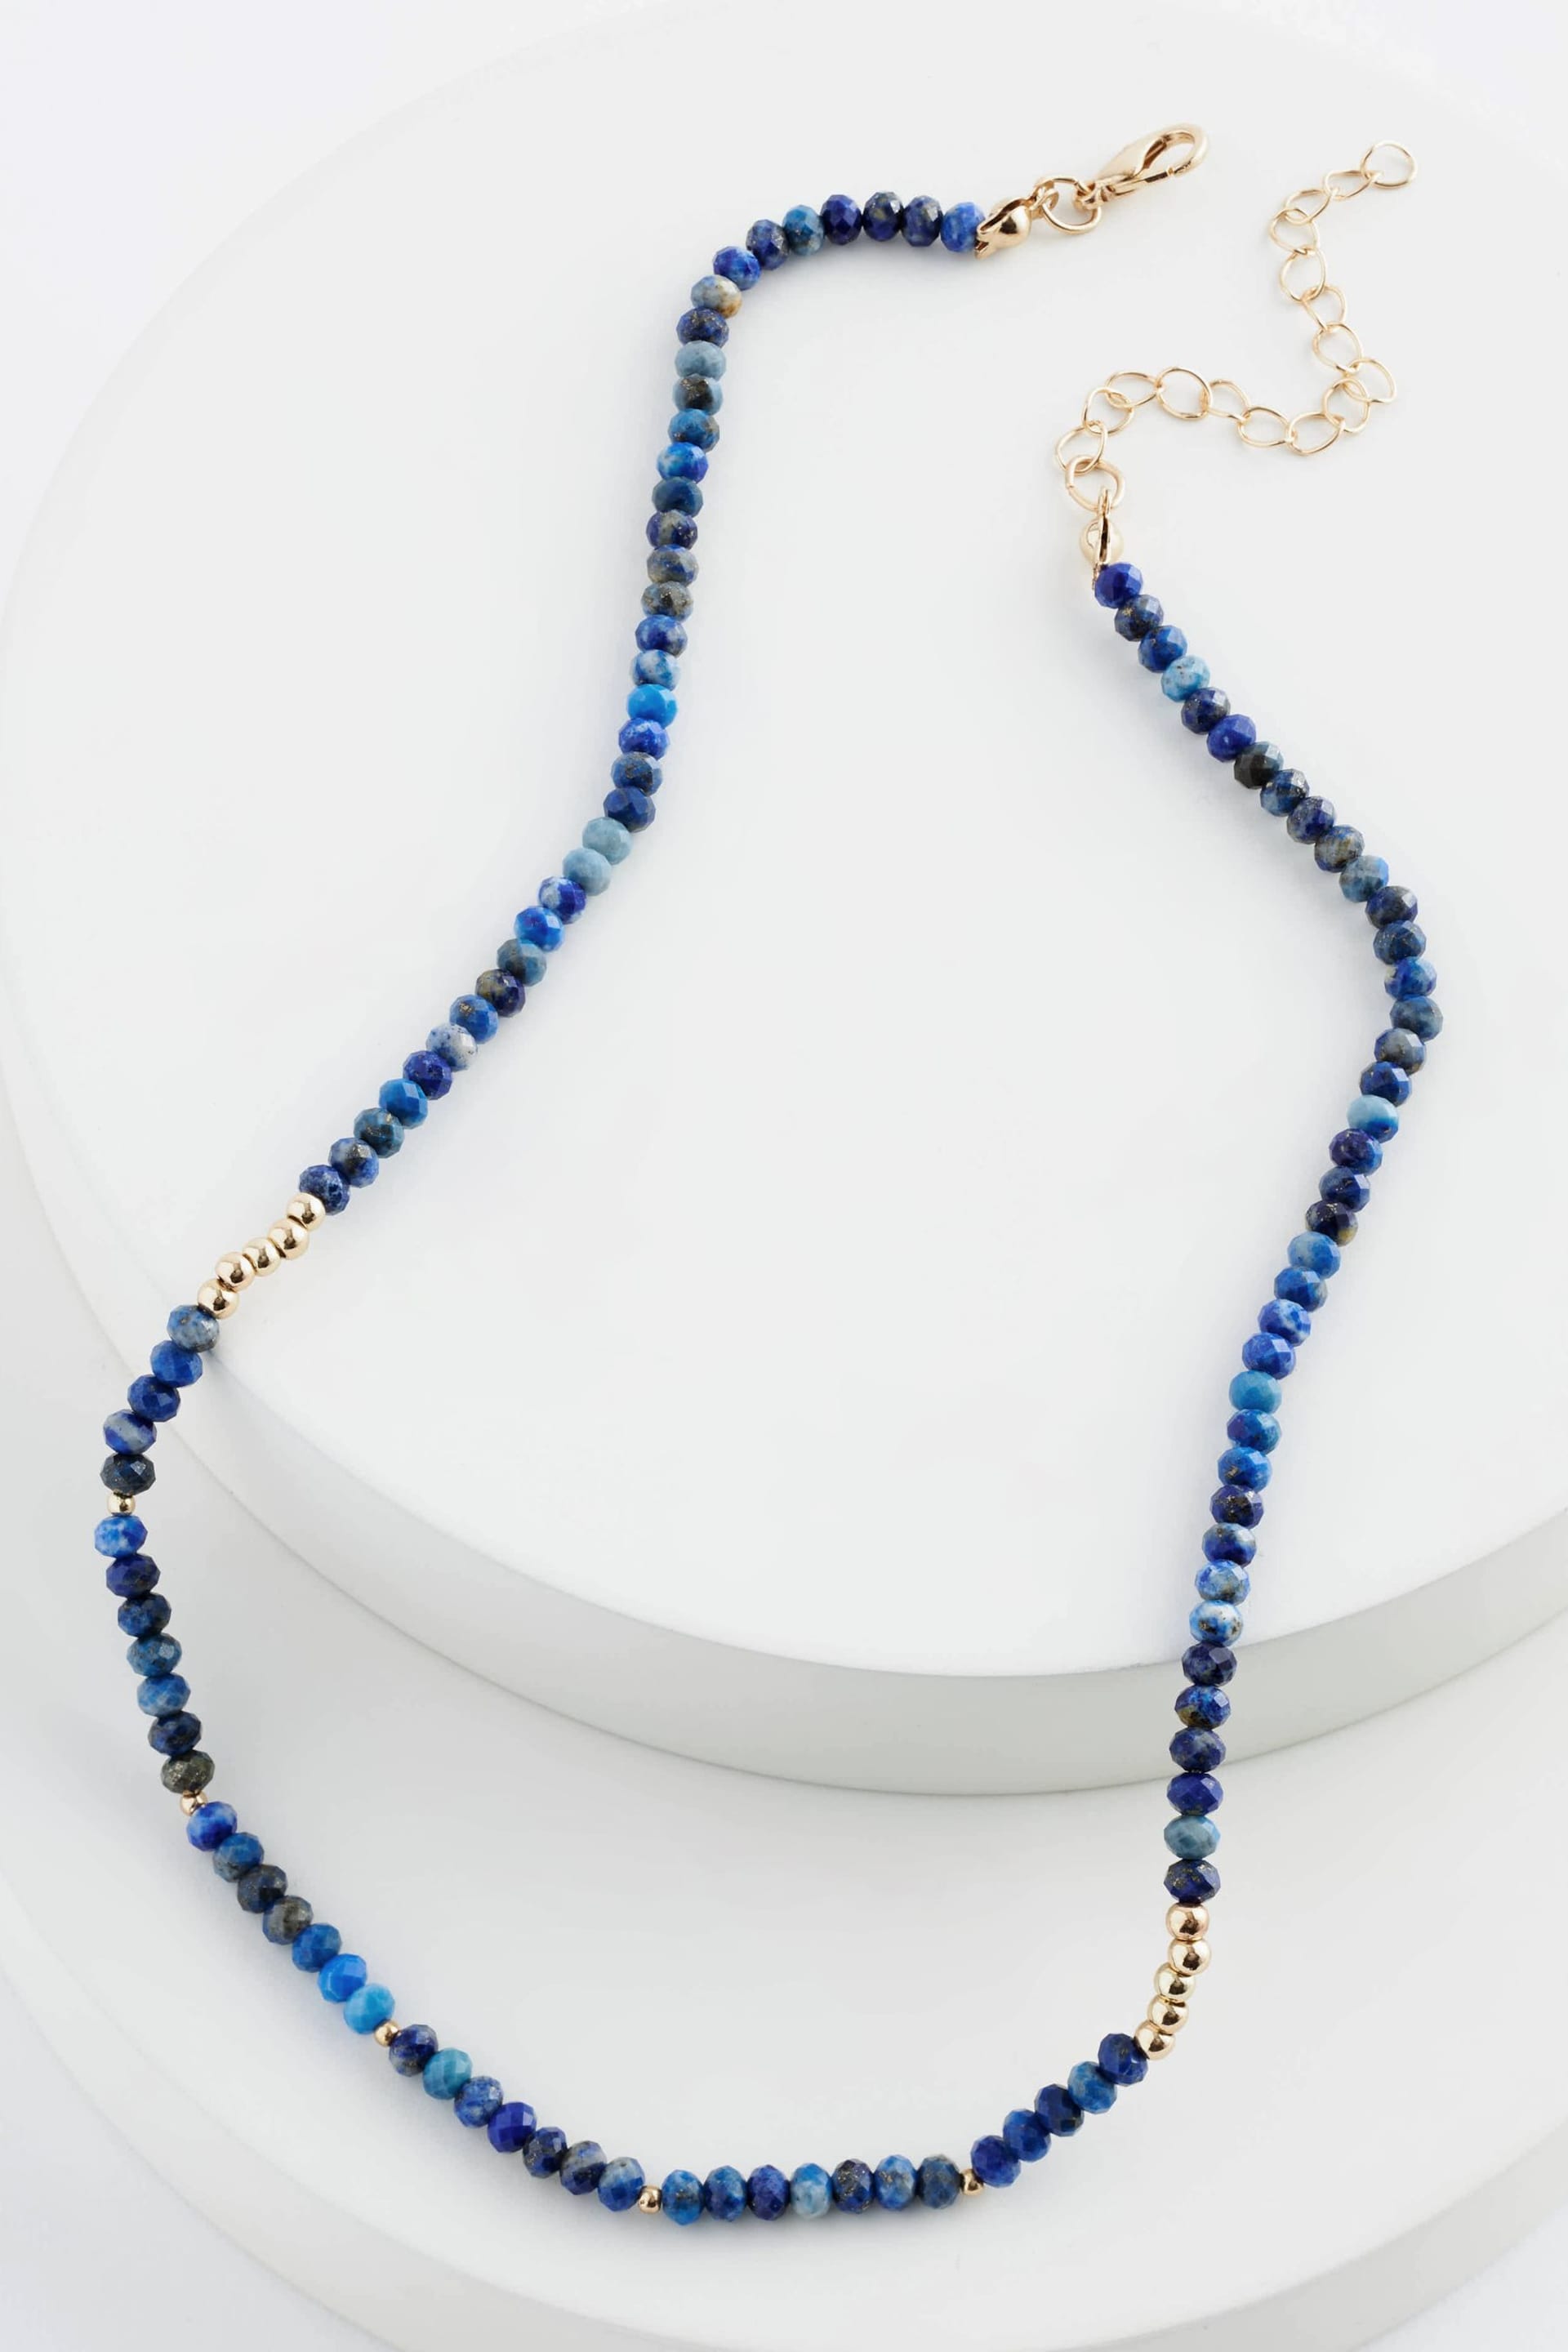 Blue Bead Short Necklace - Image 2 of 3